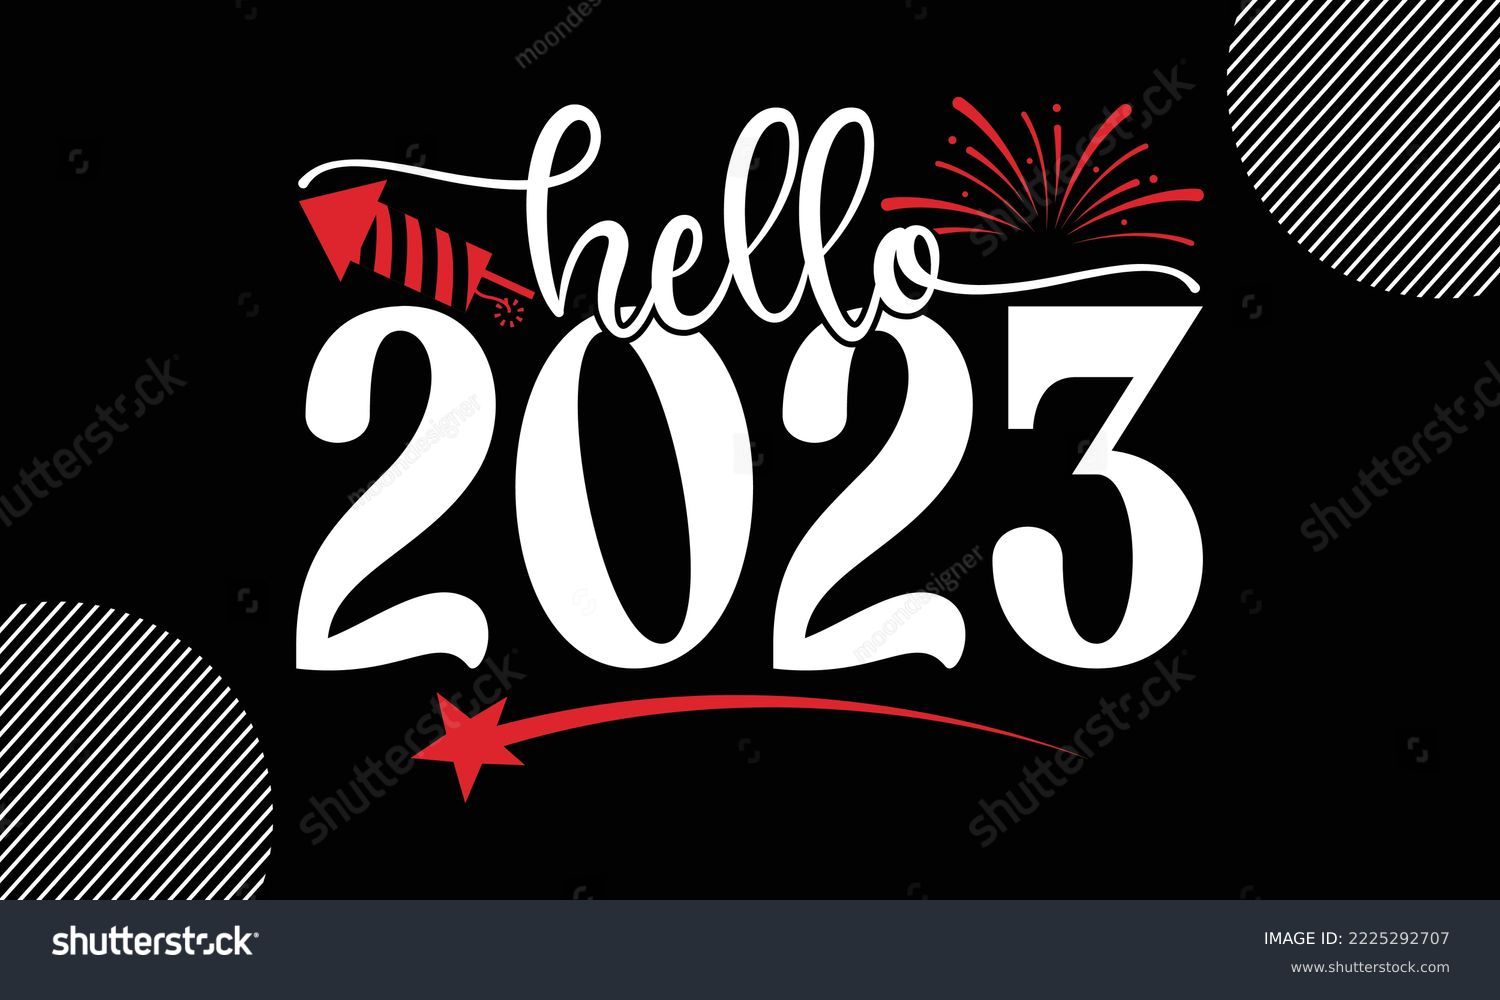 SVG of Hello 2023- Happy New Year t shirt Design,  Handmade calligraphy vector illustration, SVG Files for Cutting, EPS, bag, cups, card, gift and other printing svg